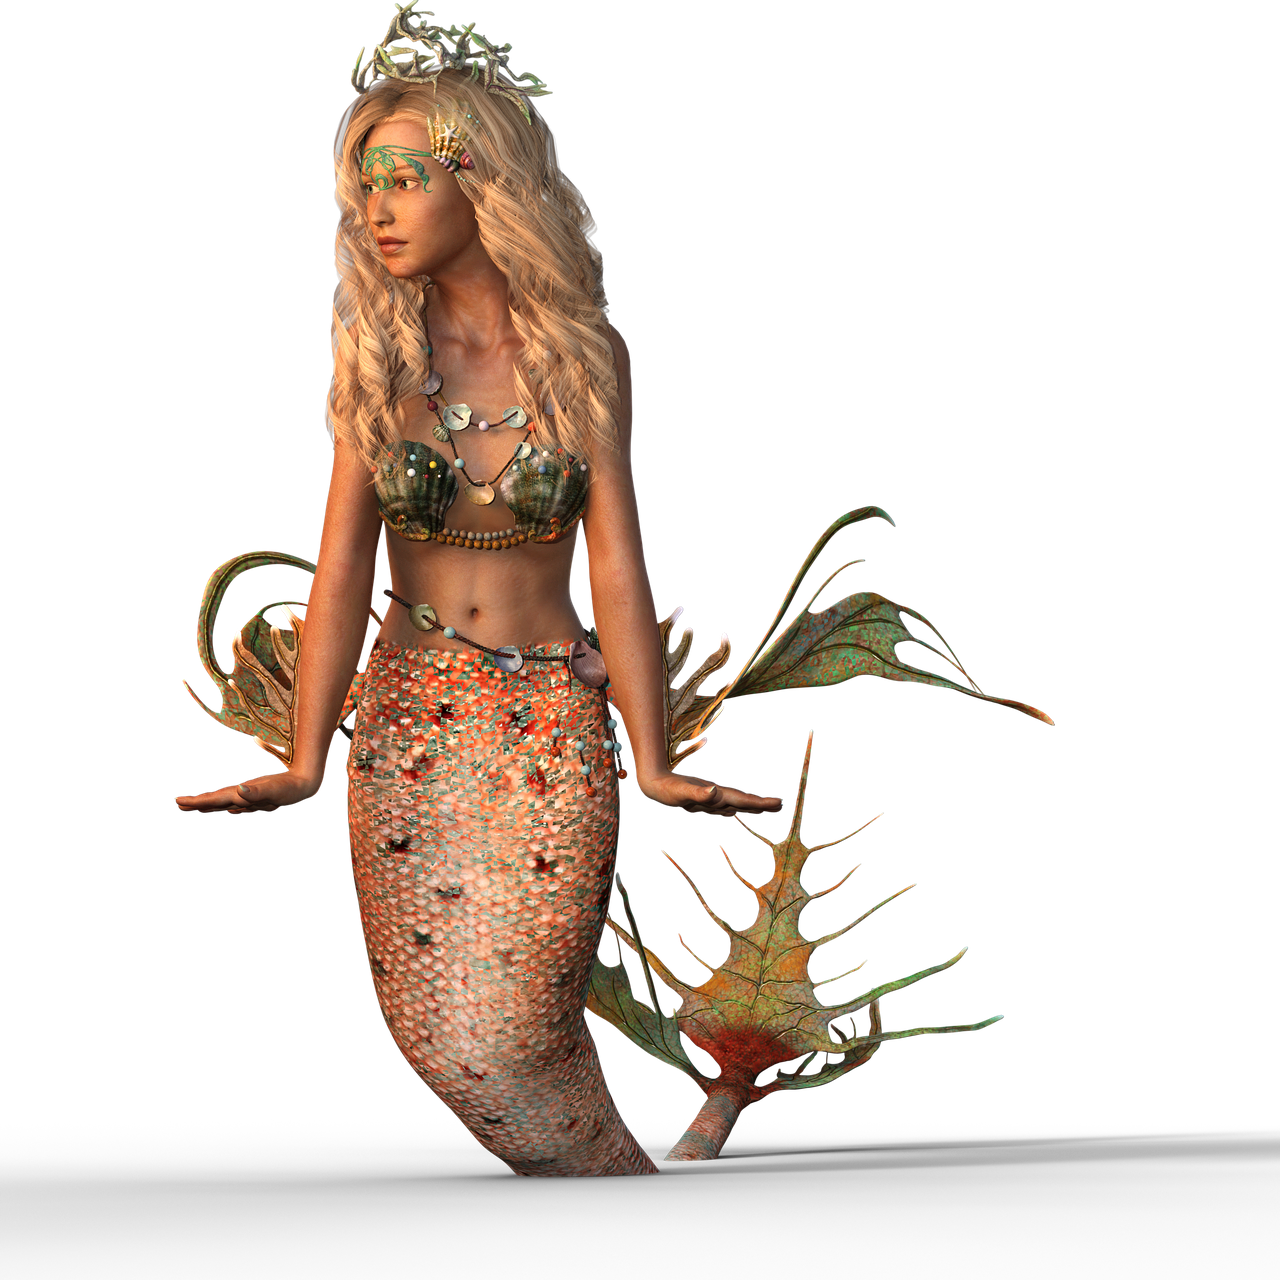 a woman in a mermaid costume holding a fish, a digital rendering, by Robert Medley, zbrush central contest winner, glitter accents on figure, high quality fantasy stock photo, ultra realistic fantasy tiara, 3/4 view realistic